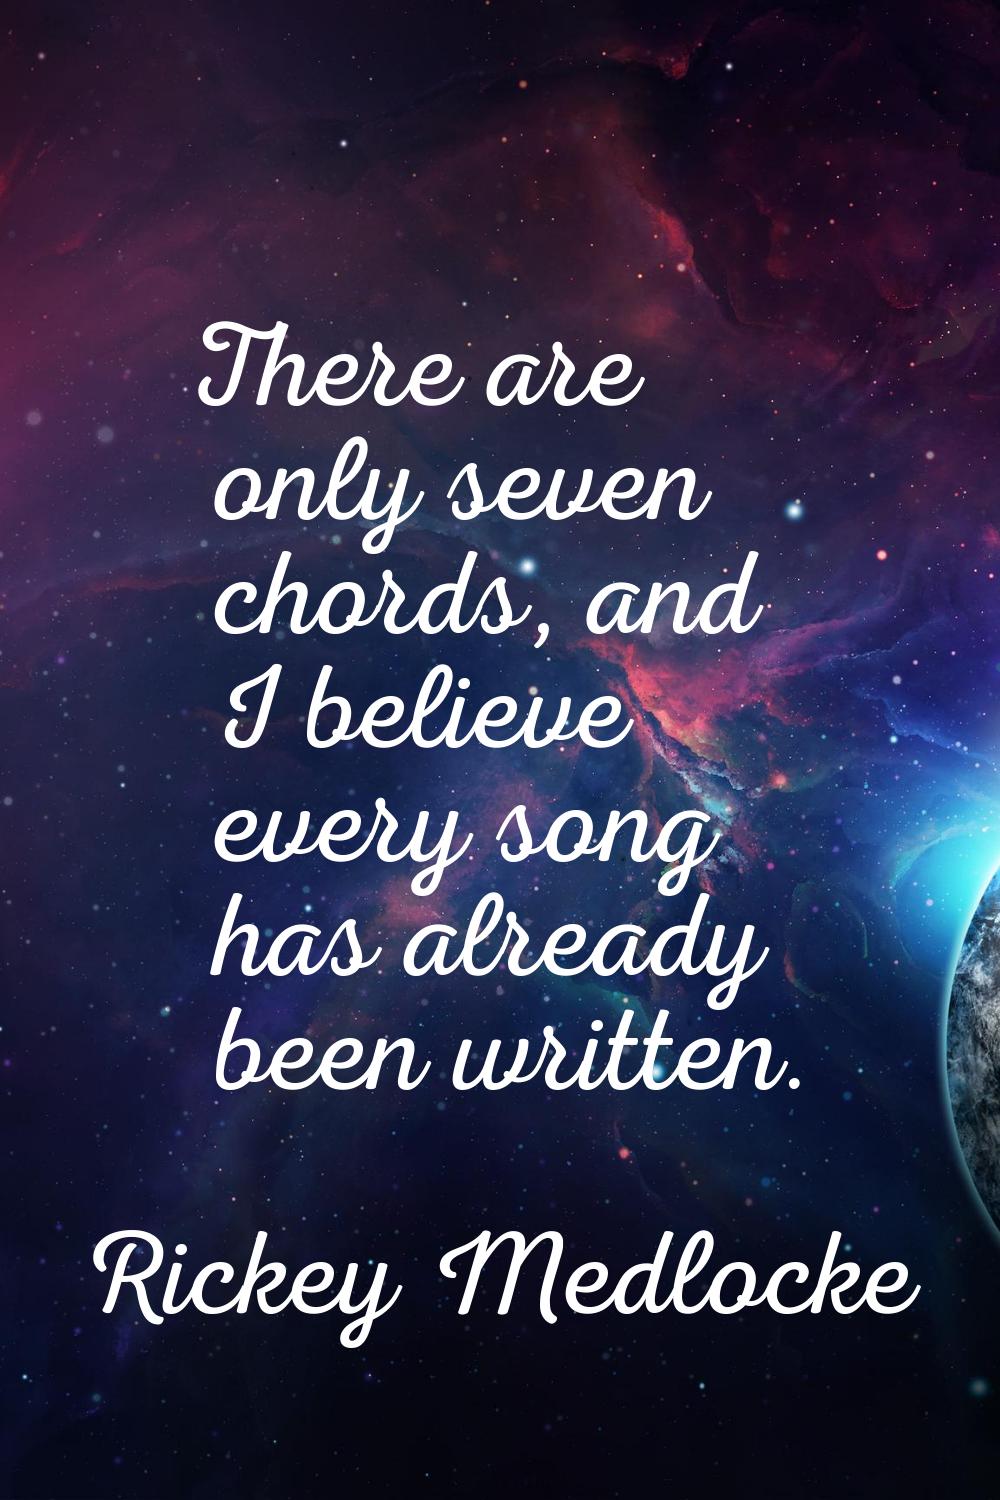 There are only seven chords, and I believe every song has already been written.